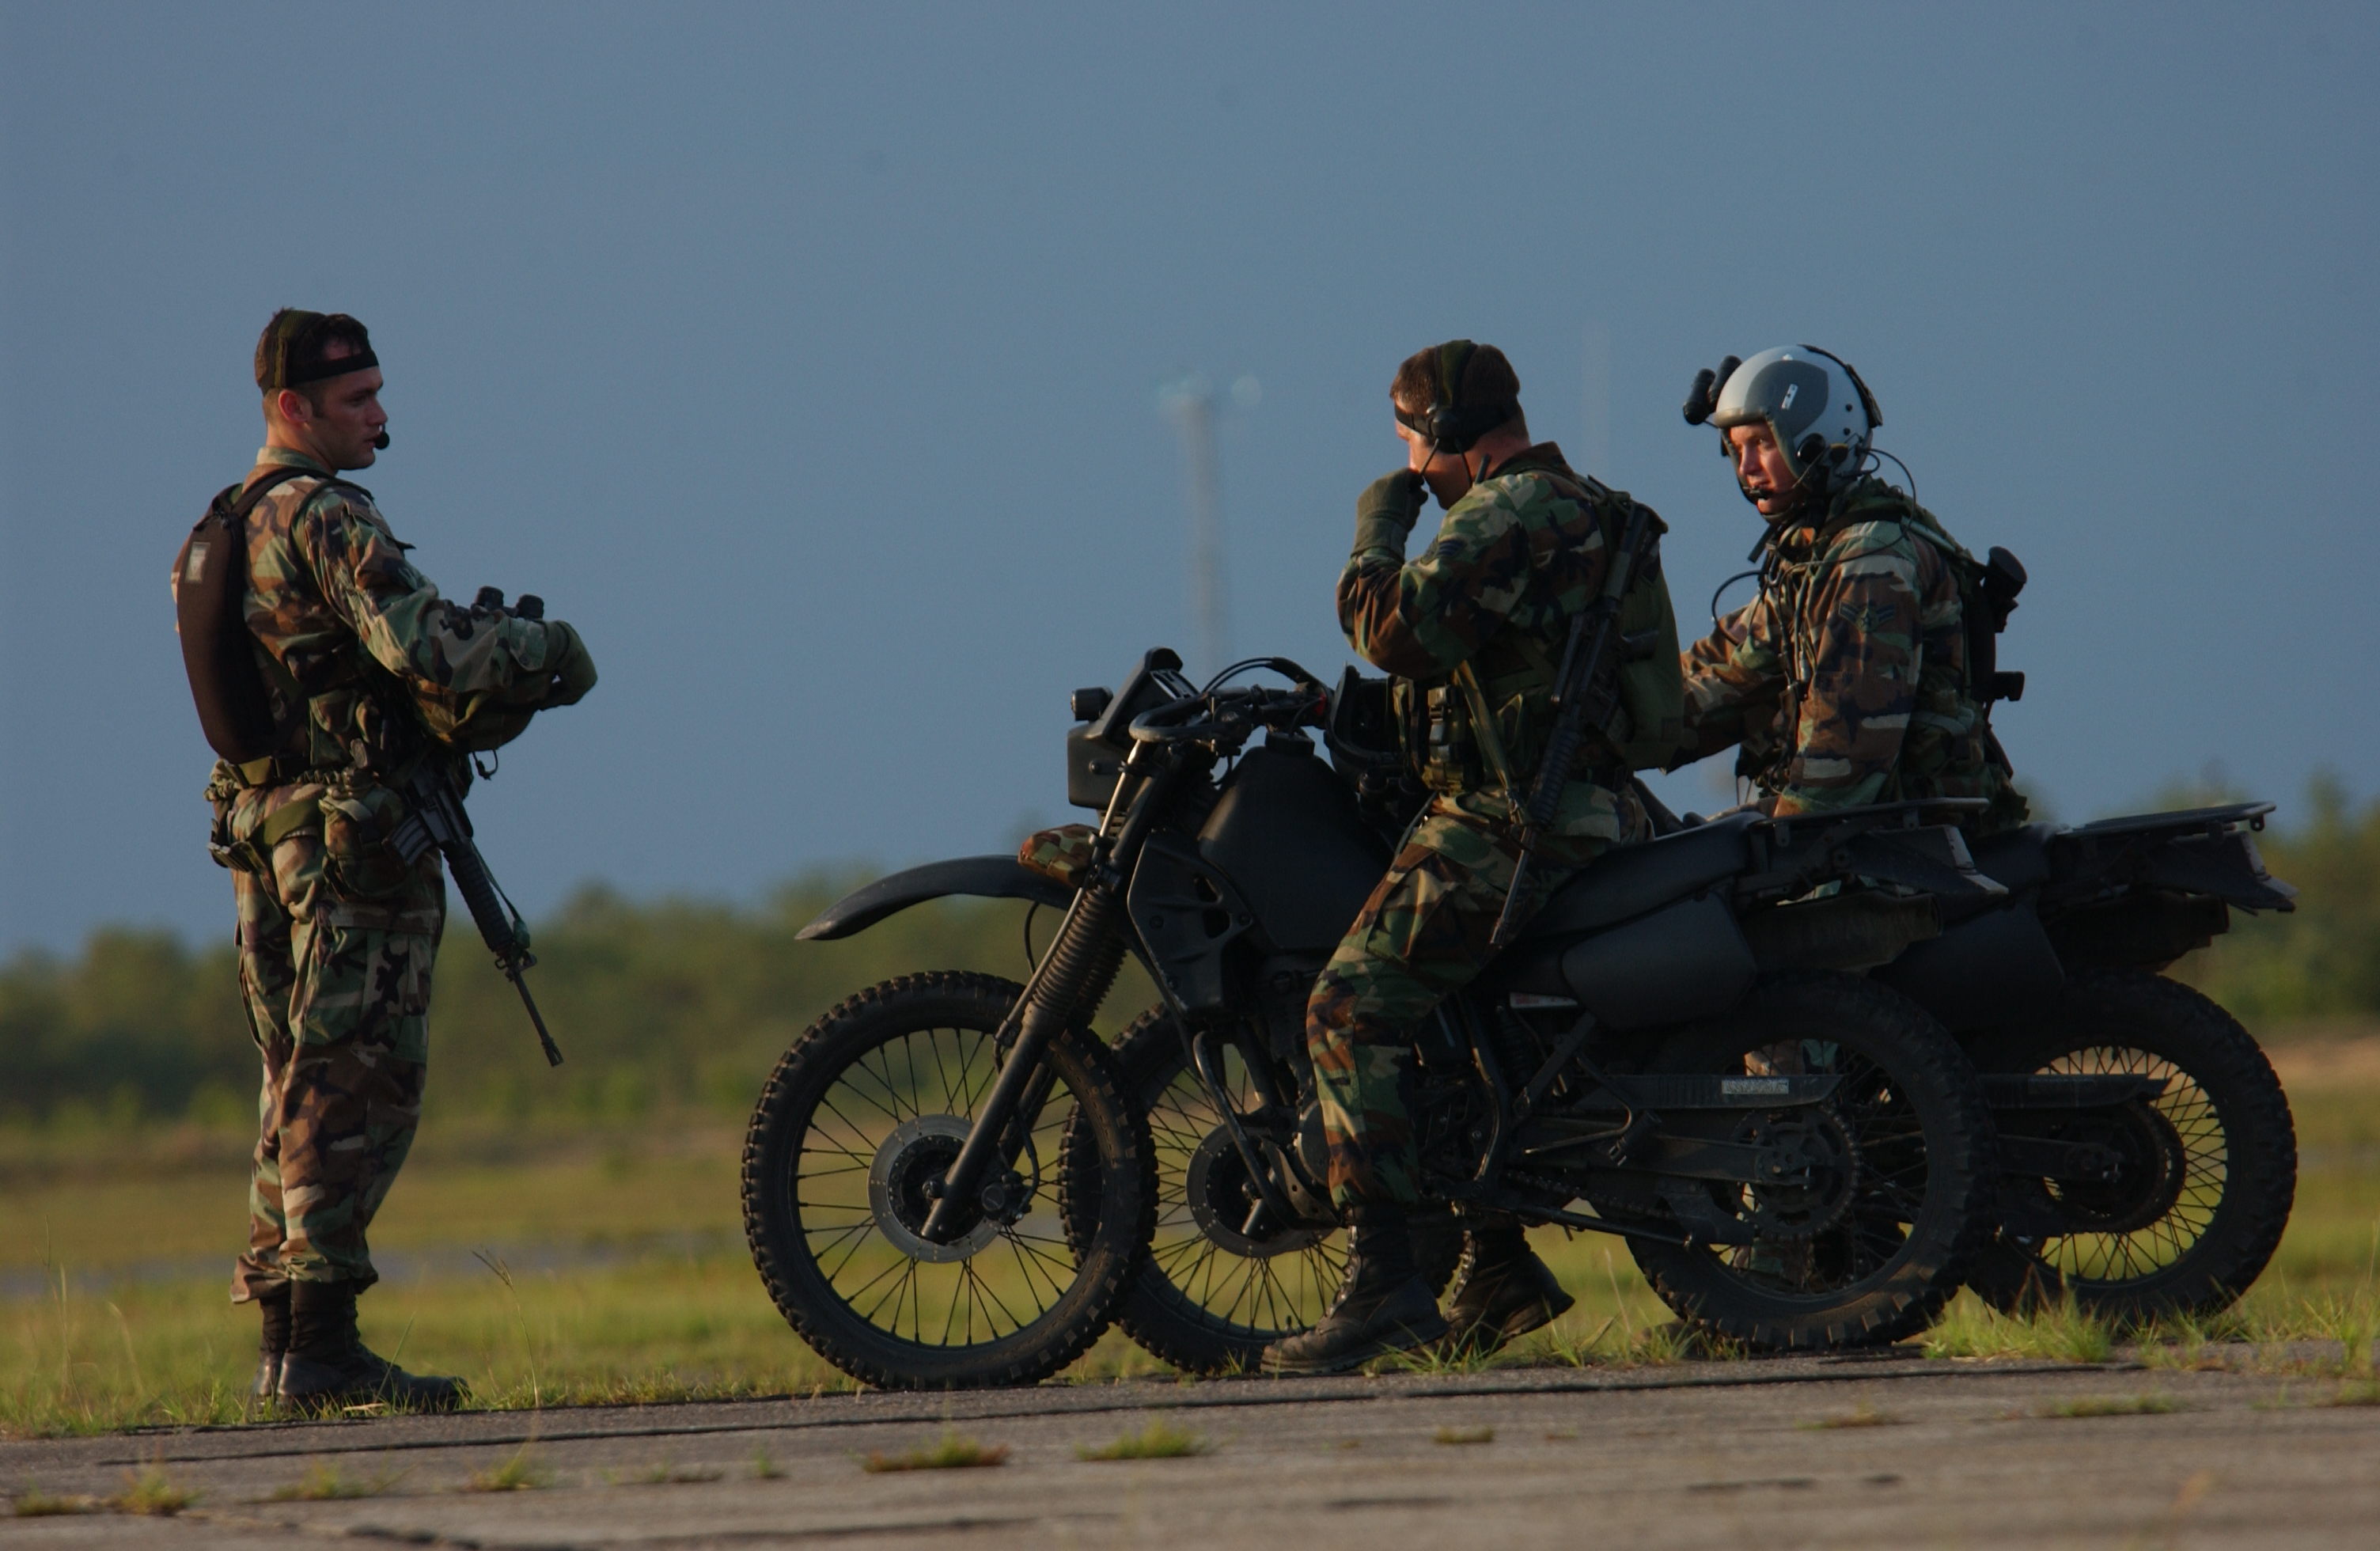 USAF Combat Controllers Motorcycles - Special Ops Photos